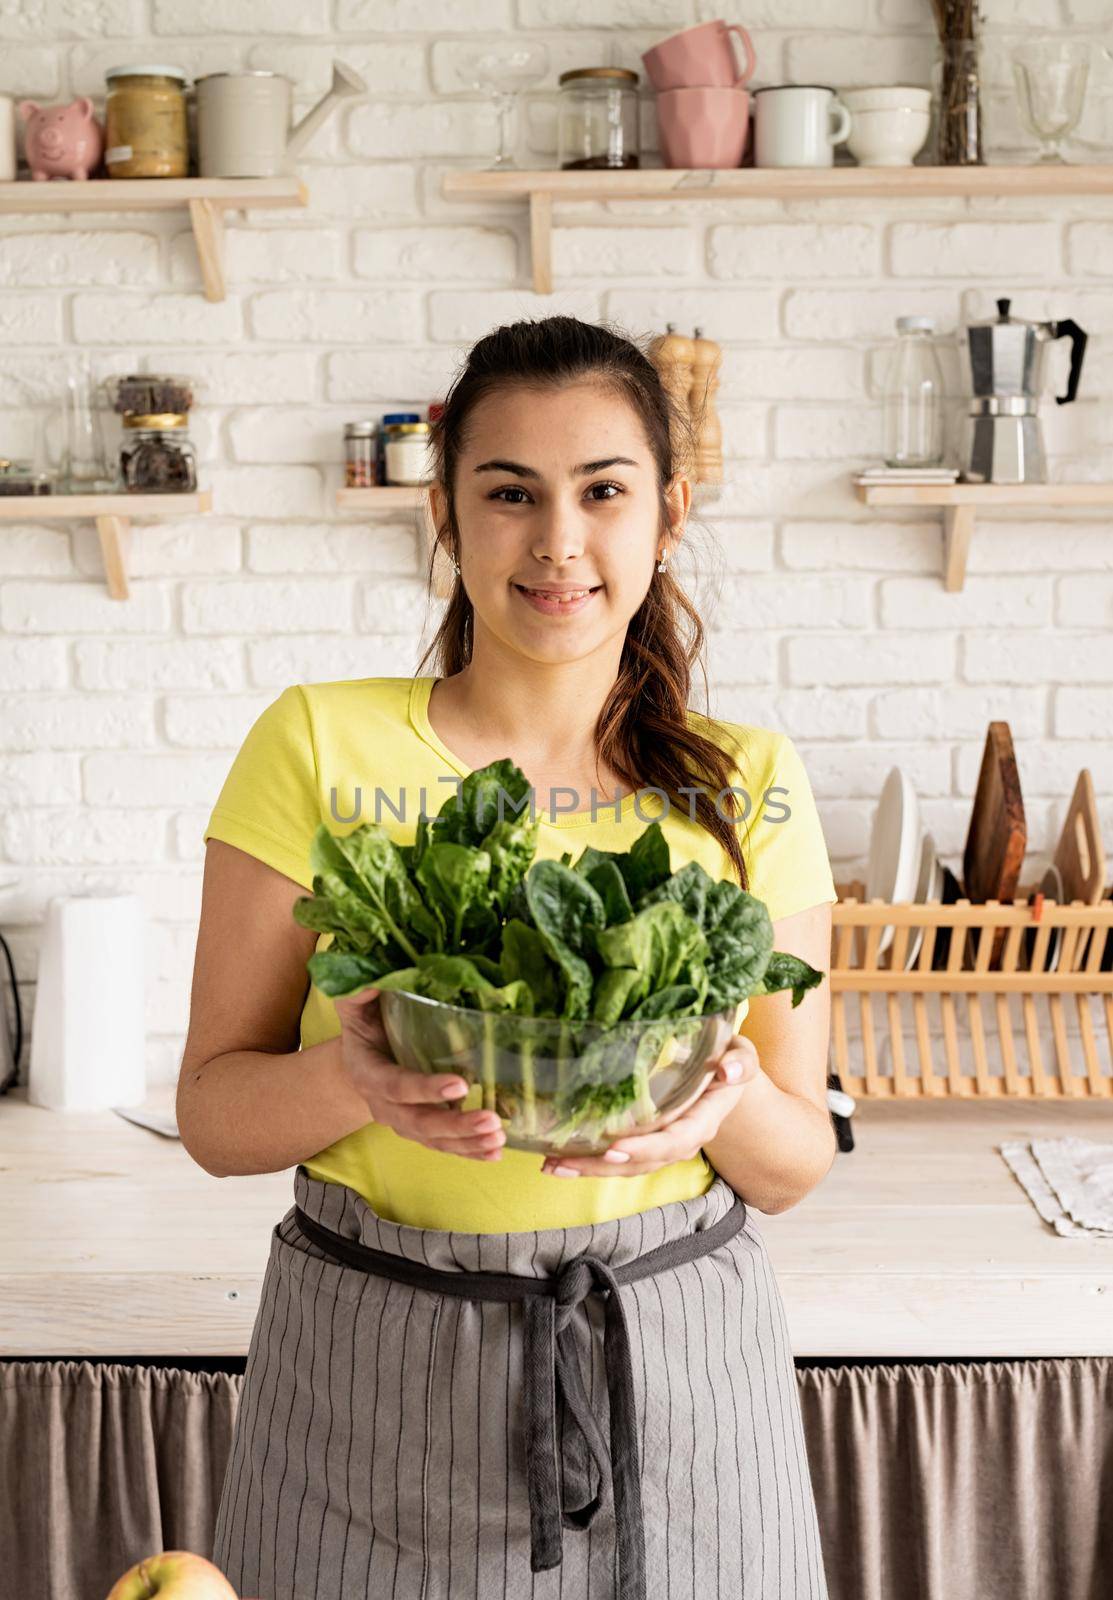 Preparing healthy foods. Healthy eating and dieting. Young caucasian brunette woman holding a bowl of fresh spinach in the kitchen